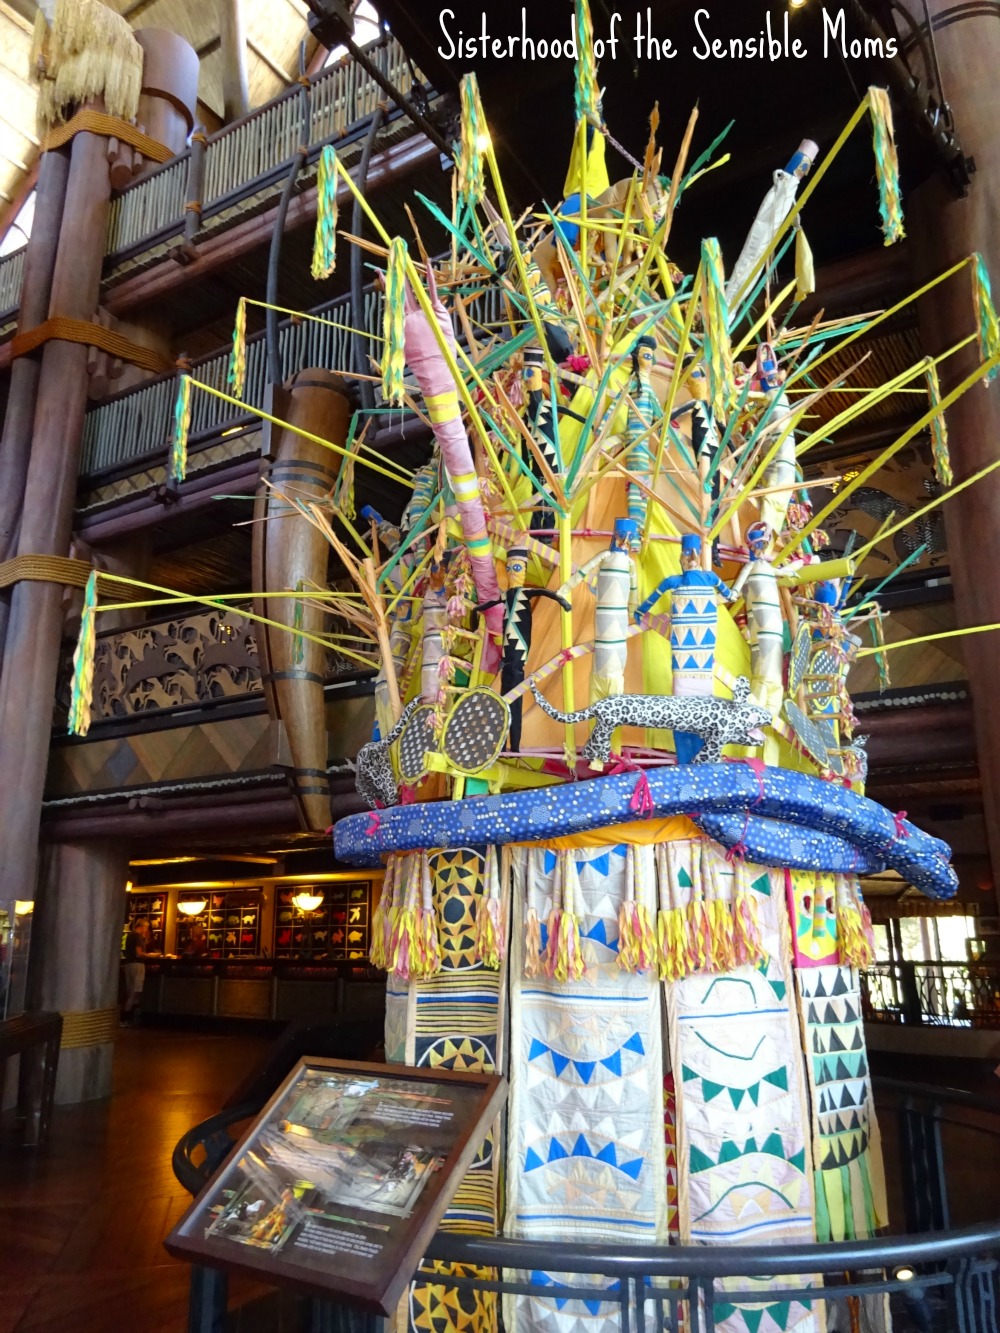 Staying at a Disney property has all kinds of benefits, but here's why Disney's Animal Kingdom Lodge is perfect for teens. | Family Travel | Sisterhood of the Sensible Moms